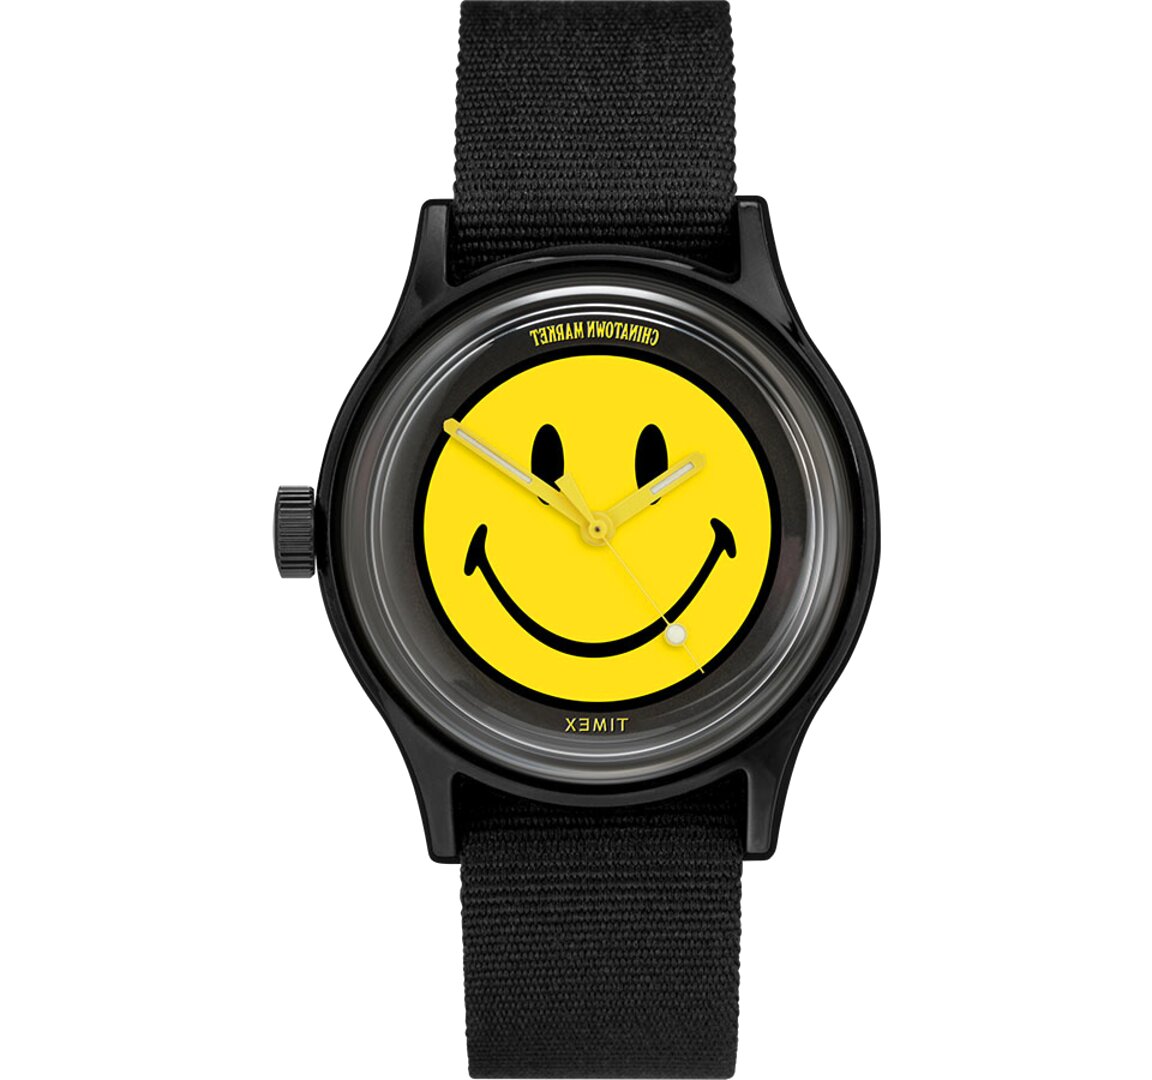 Smiley Face Watch for sale in UK | 45 used Smiley Face Watchs